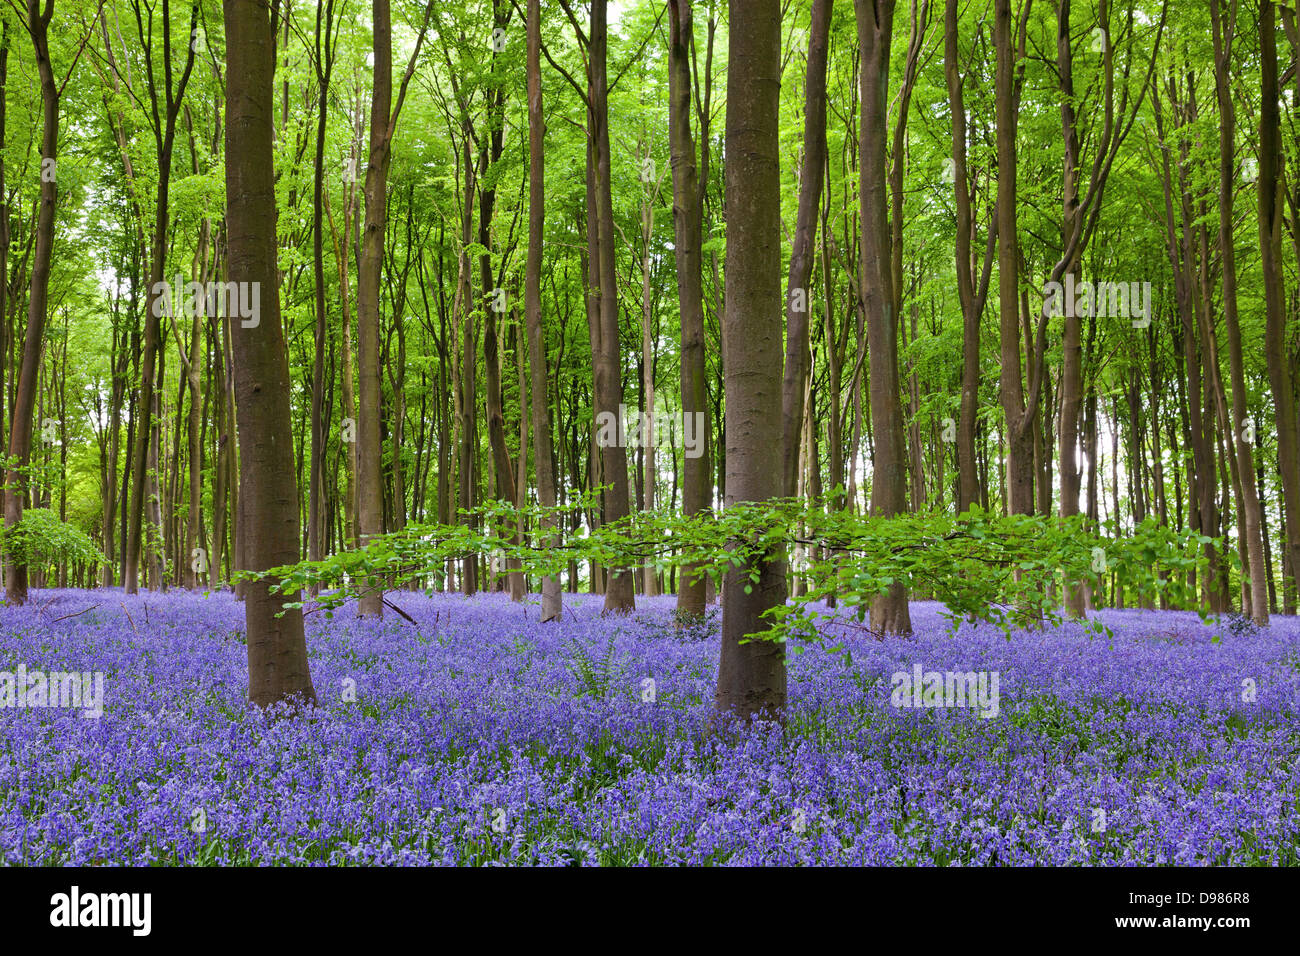 A low branch on the foreground beech tree spreads out over the bluebells at Michedever Wood in Hampshire Stock Photo